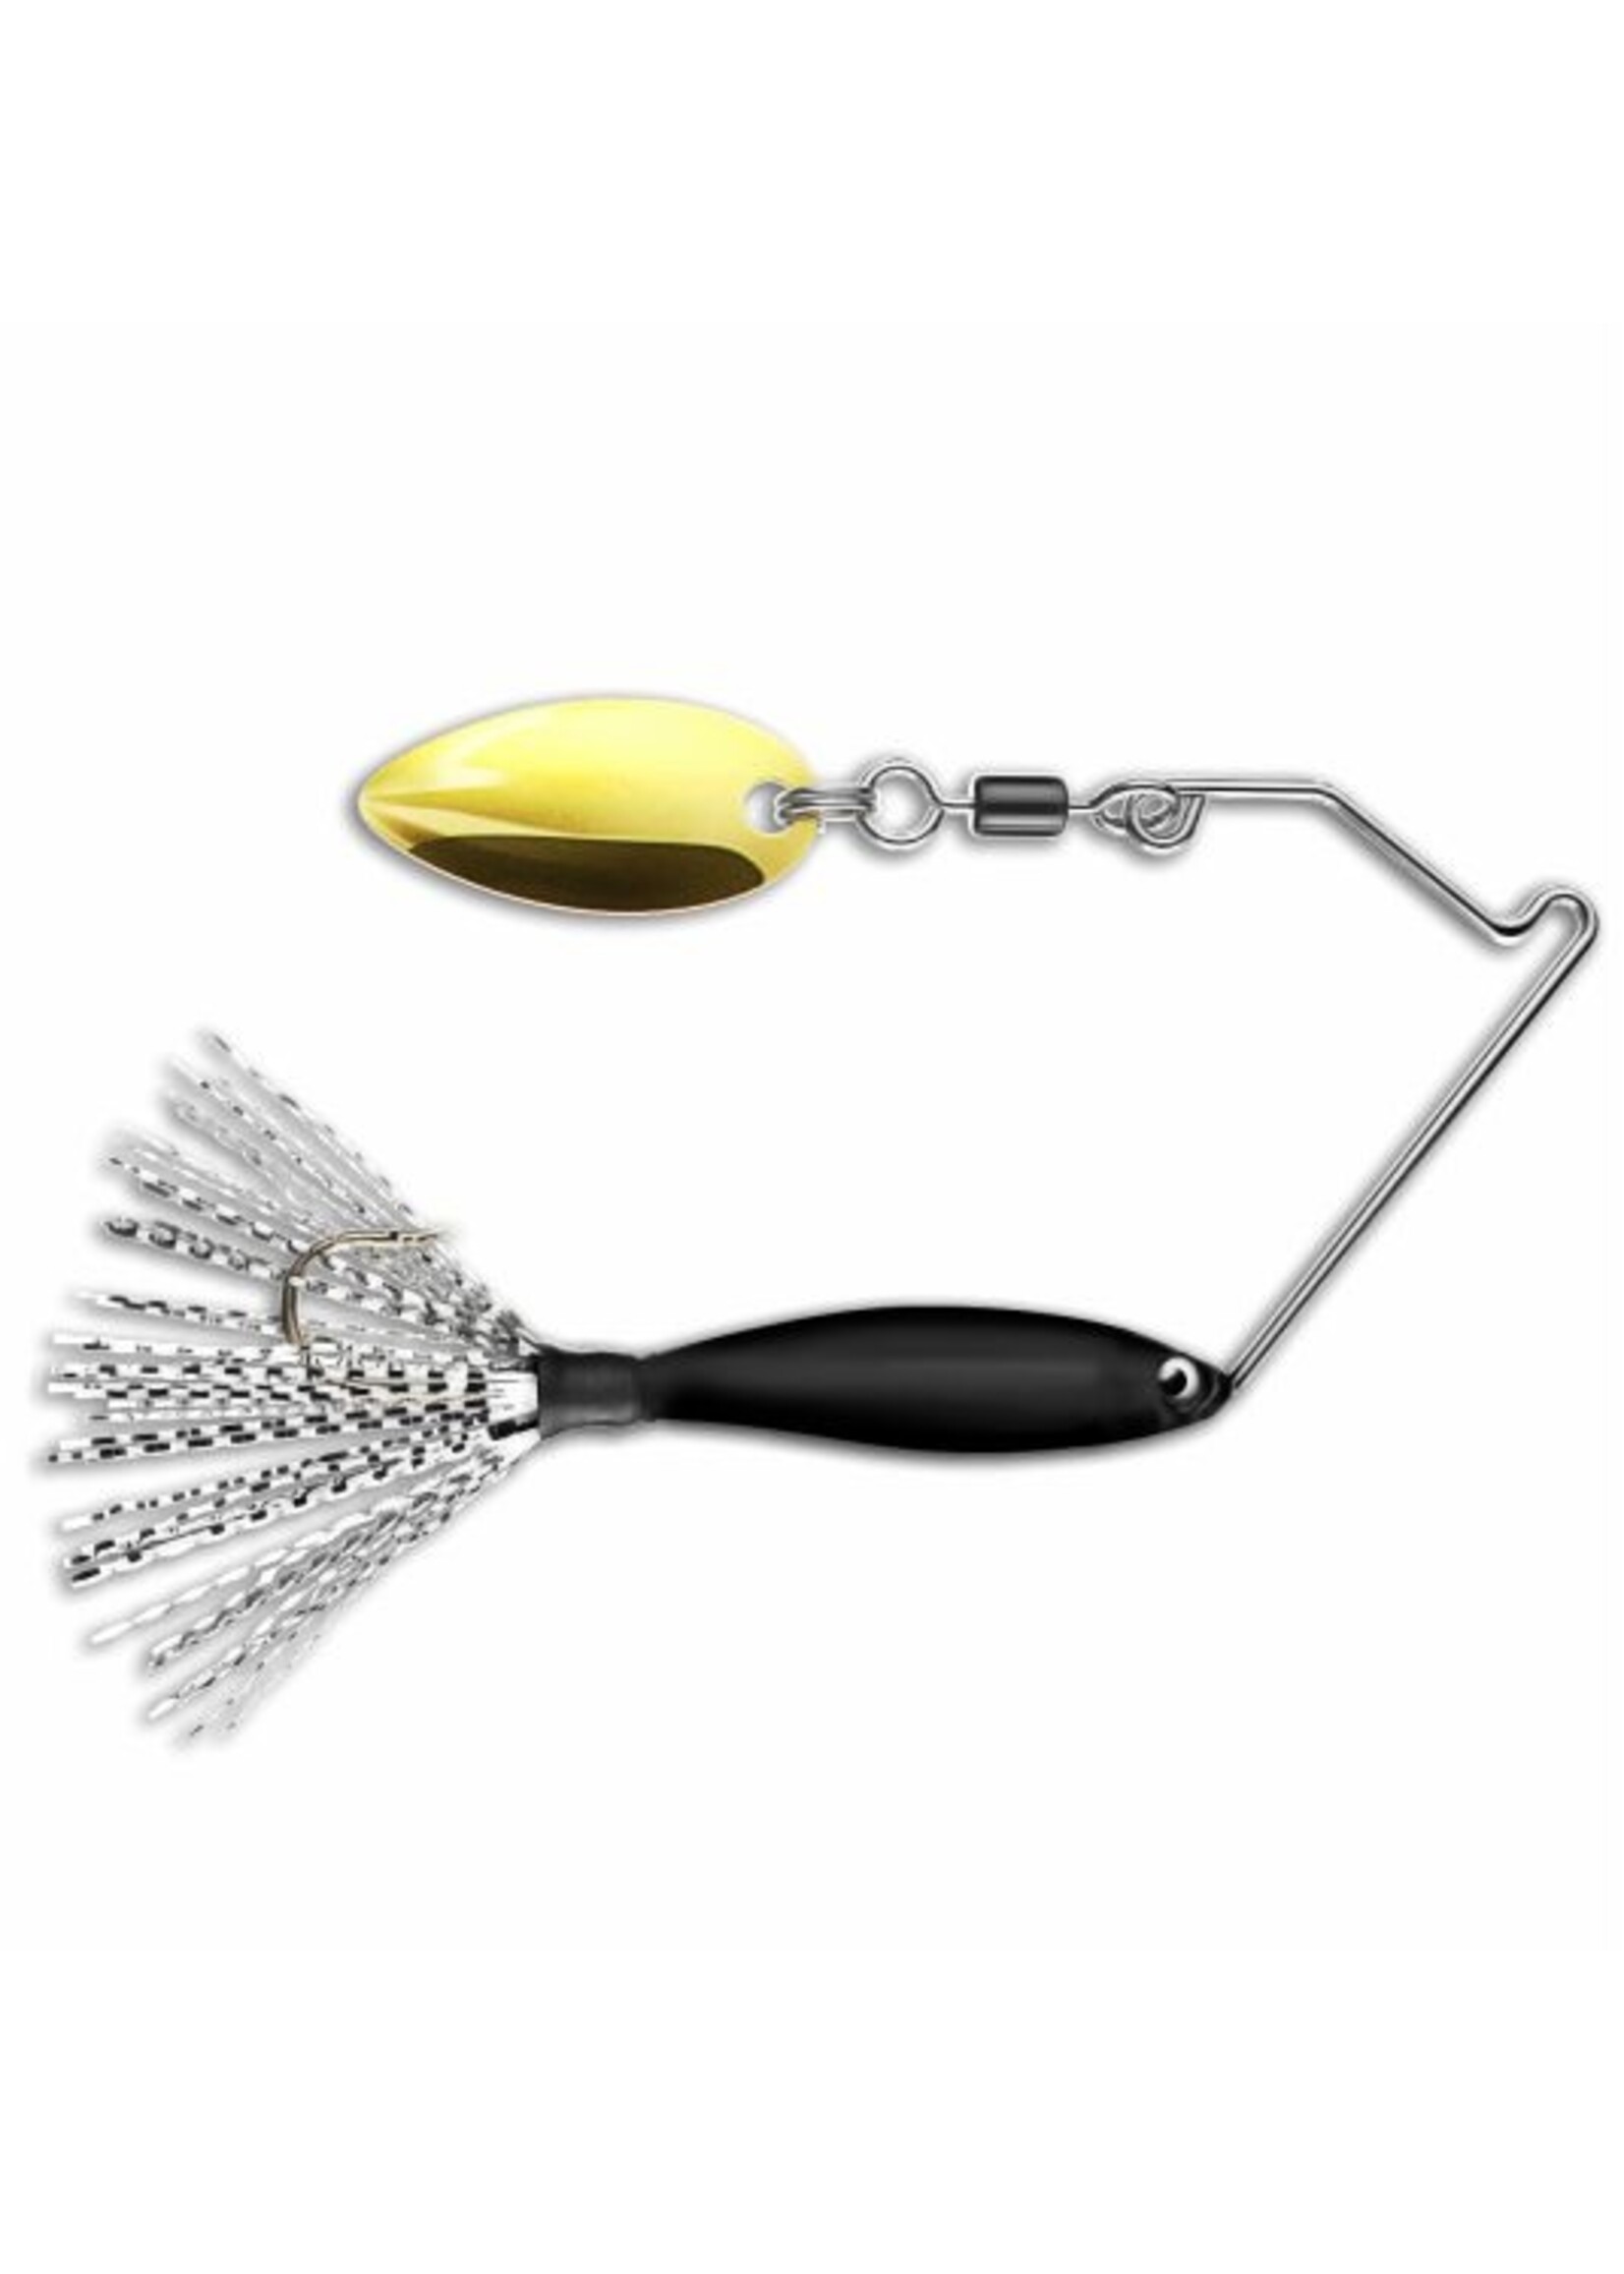 Dynamic Lures Micro Spinnerbait - Tackle Shack